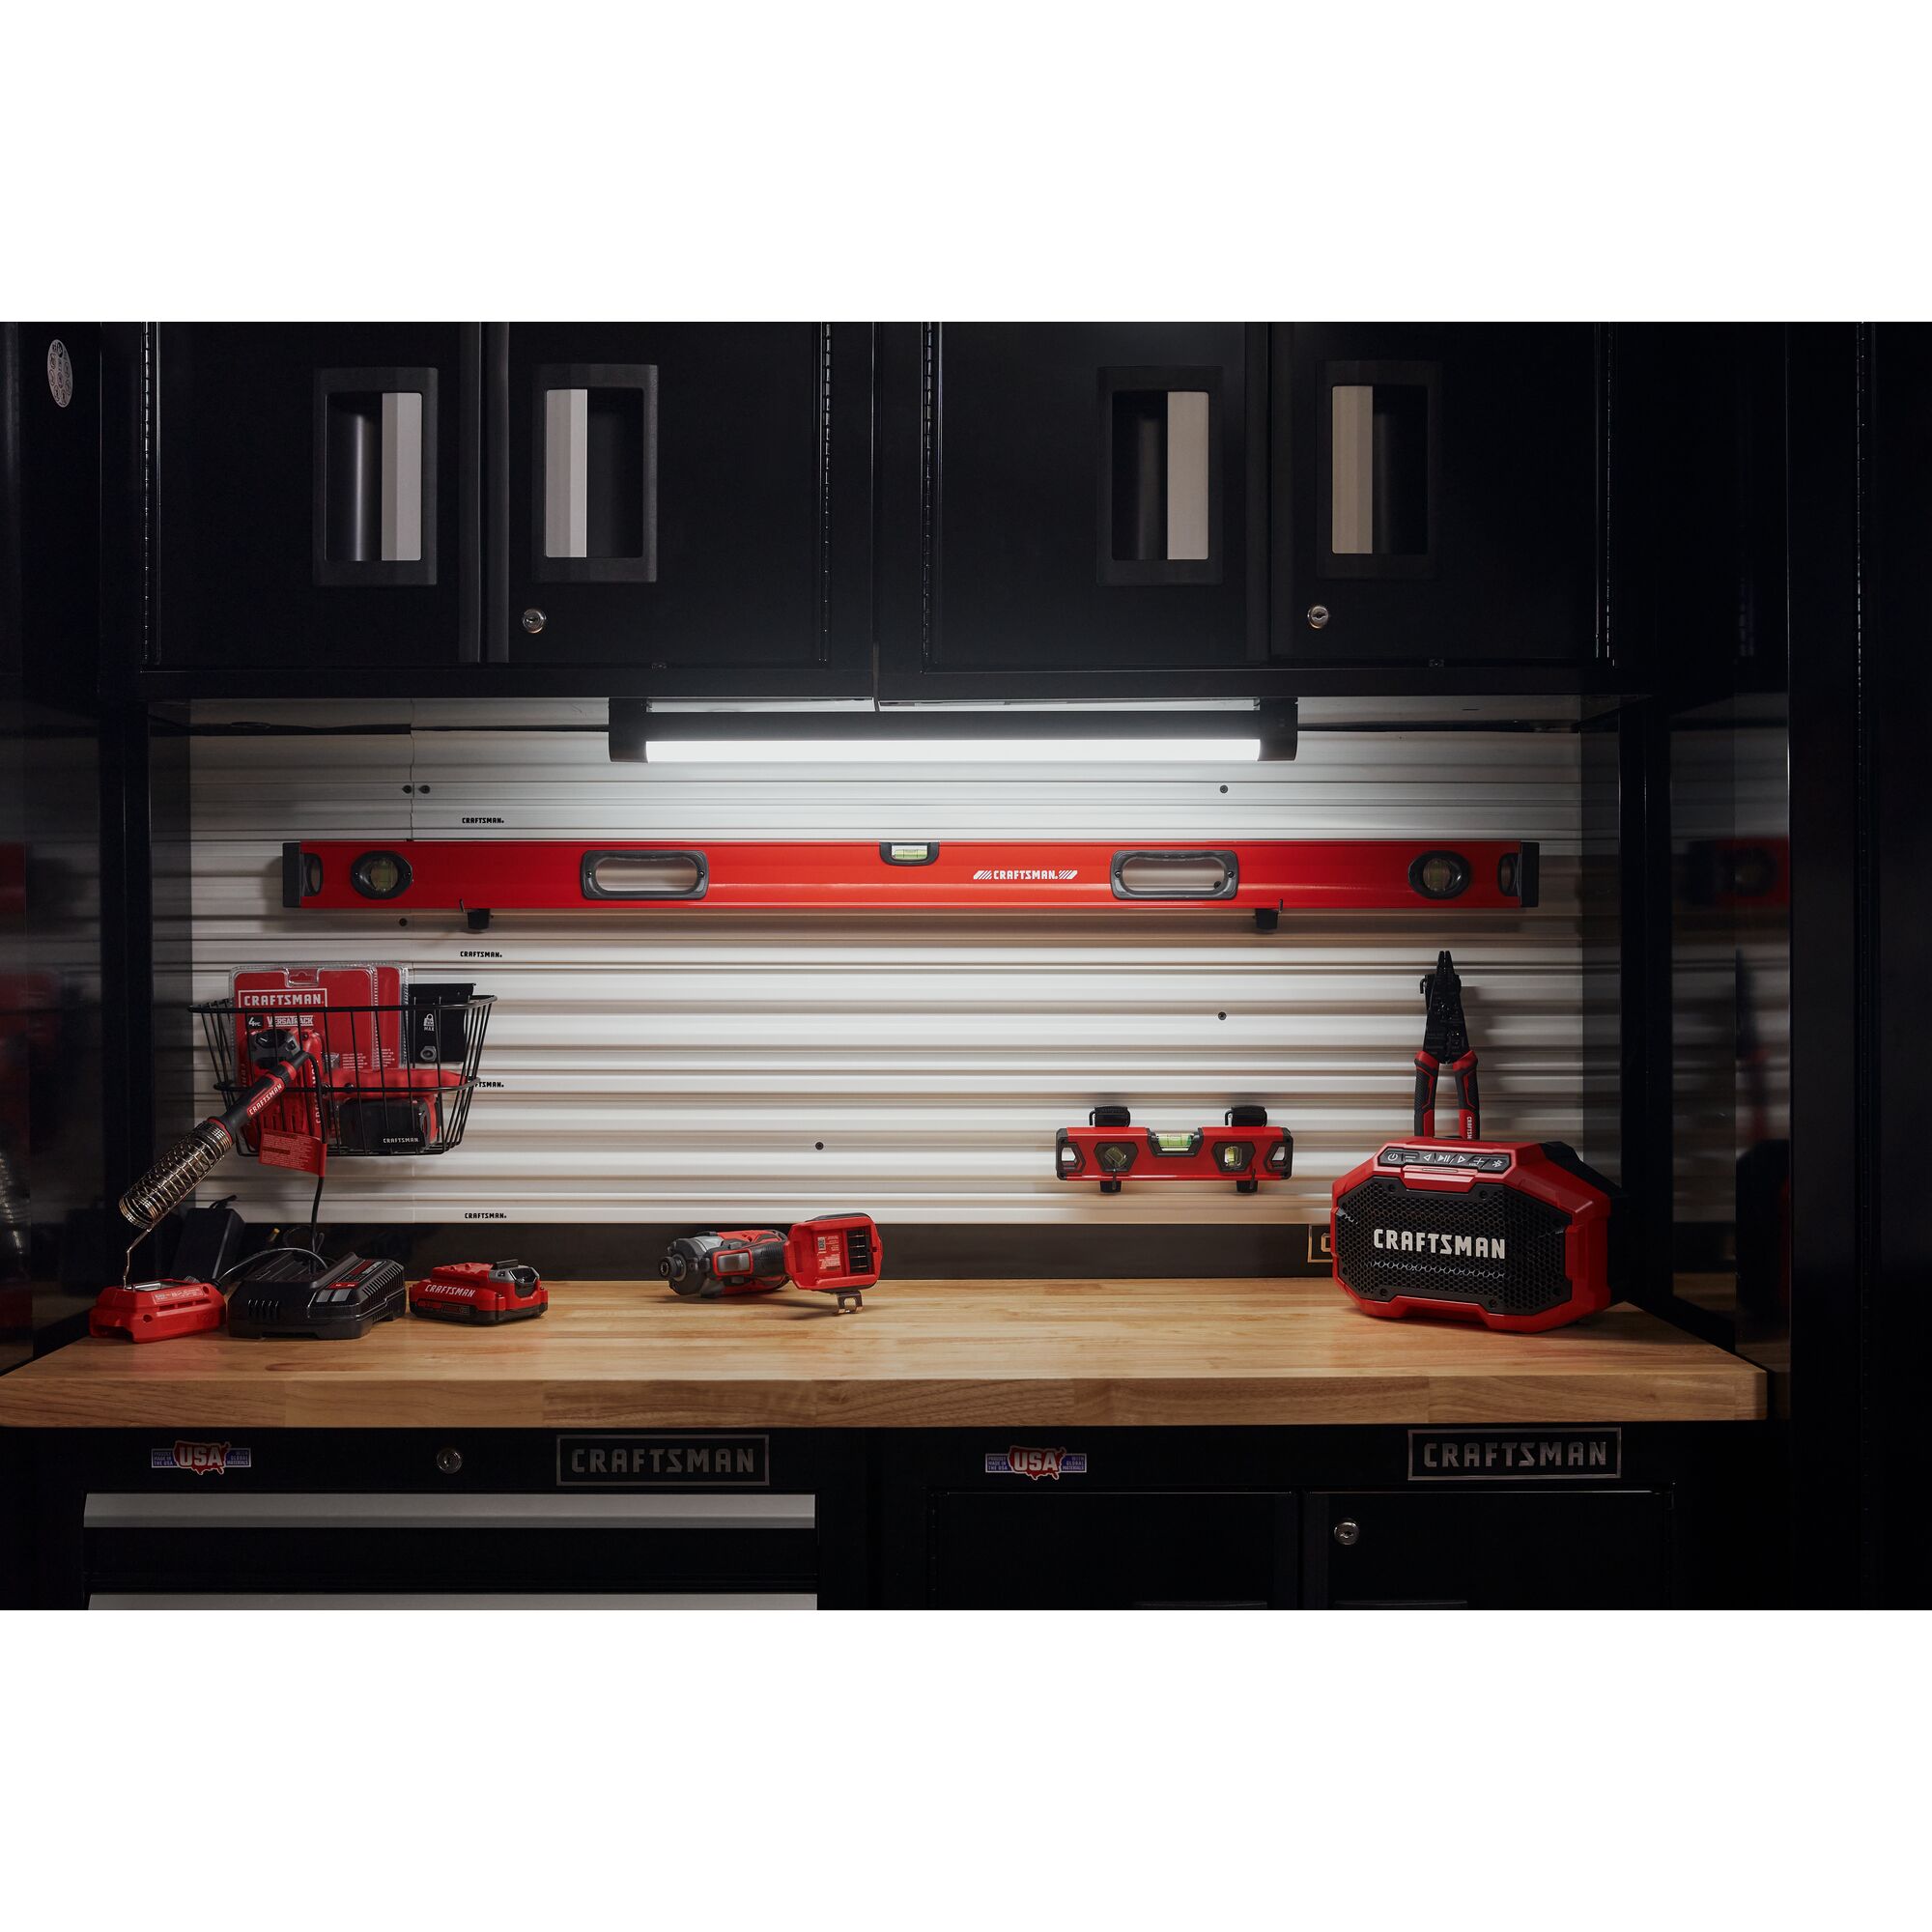 Variety of hand tools, power tools laying on CRAFTSMAN storage.